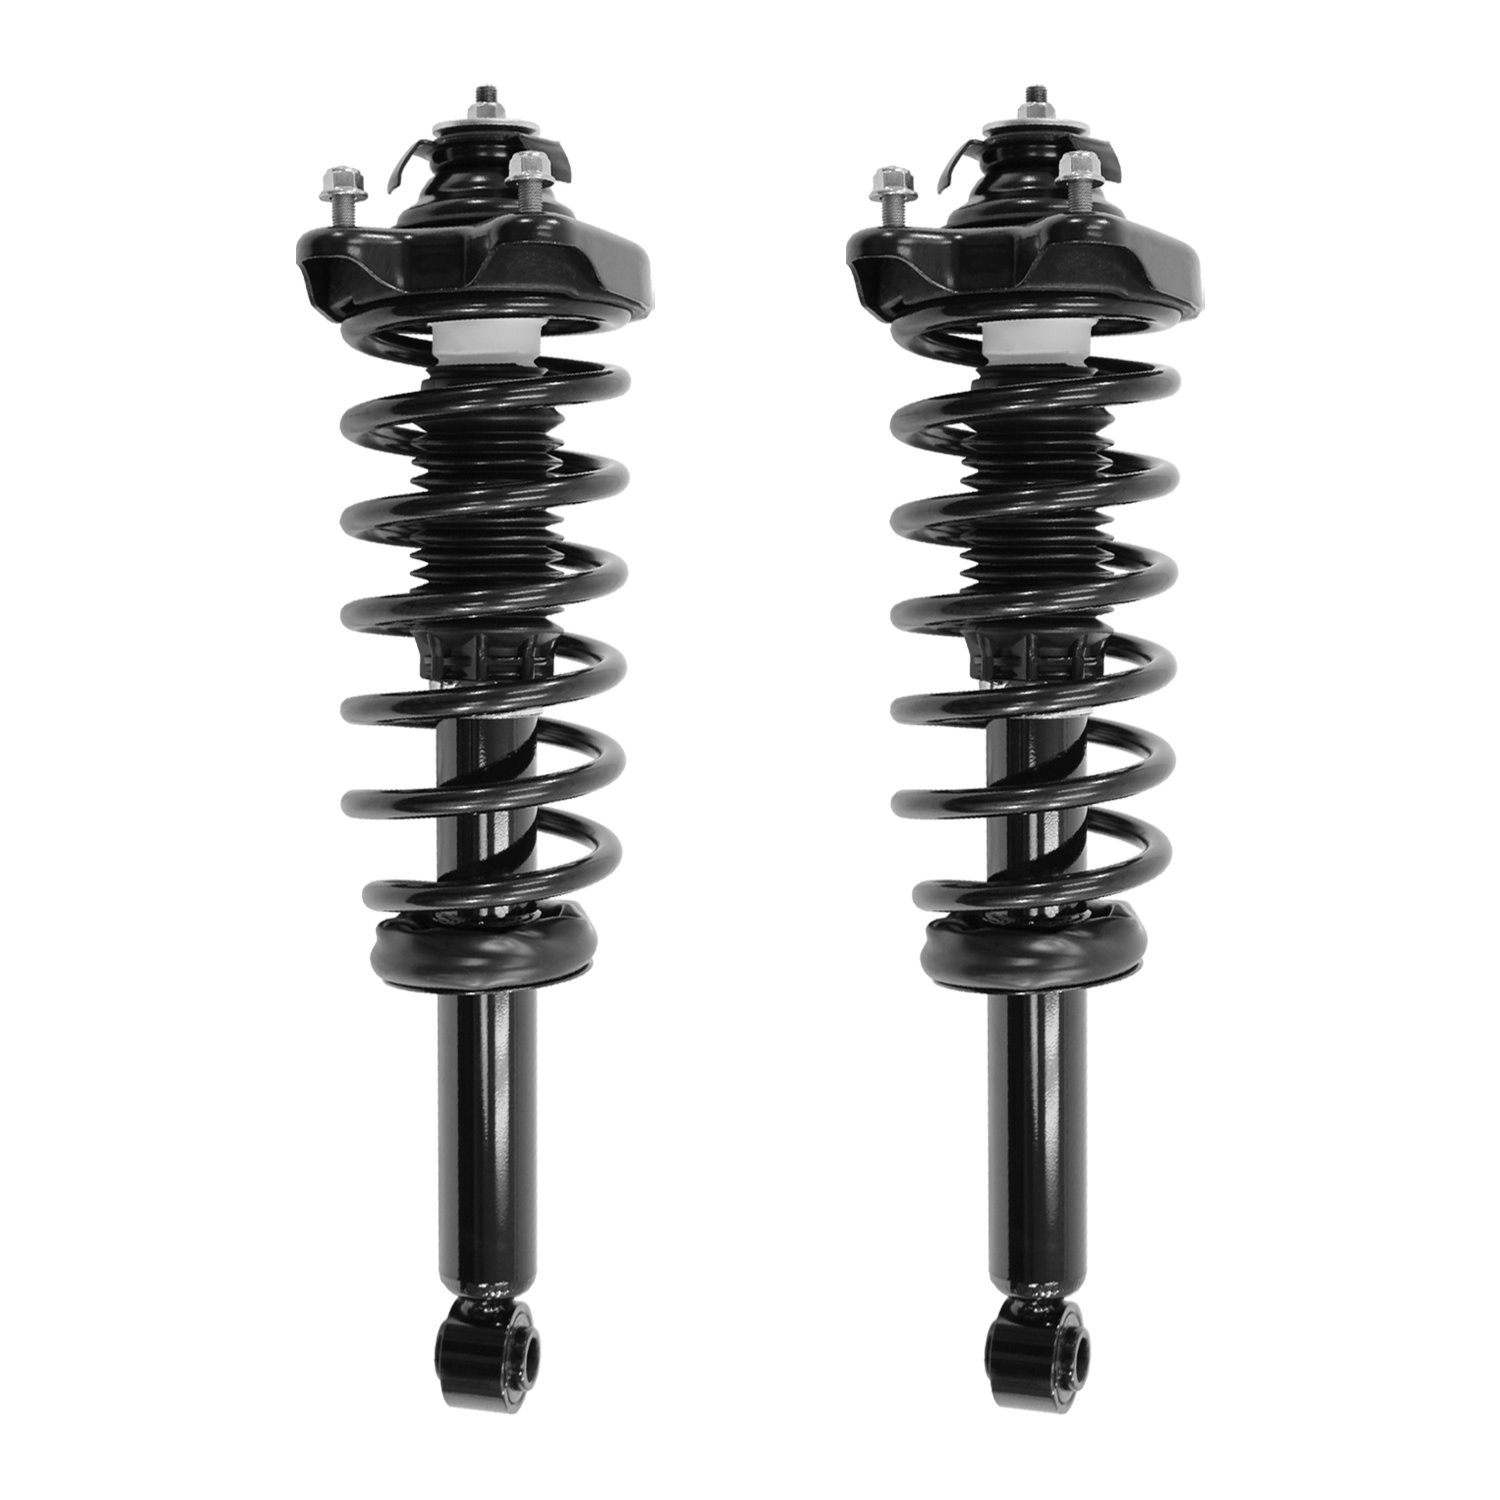 2-16060-001 Rear Suspension Strut & Coil Spring Assemby Set Fits Select Mitsubishi Galant